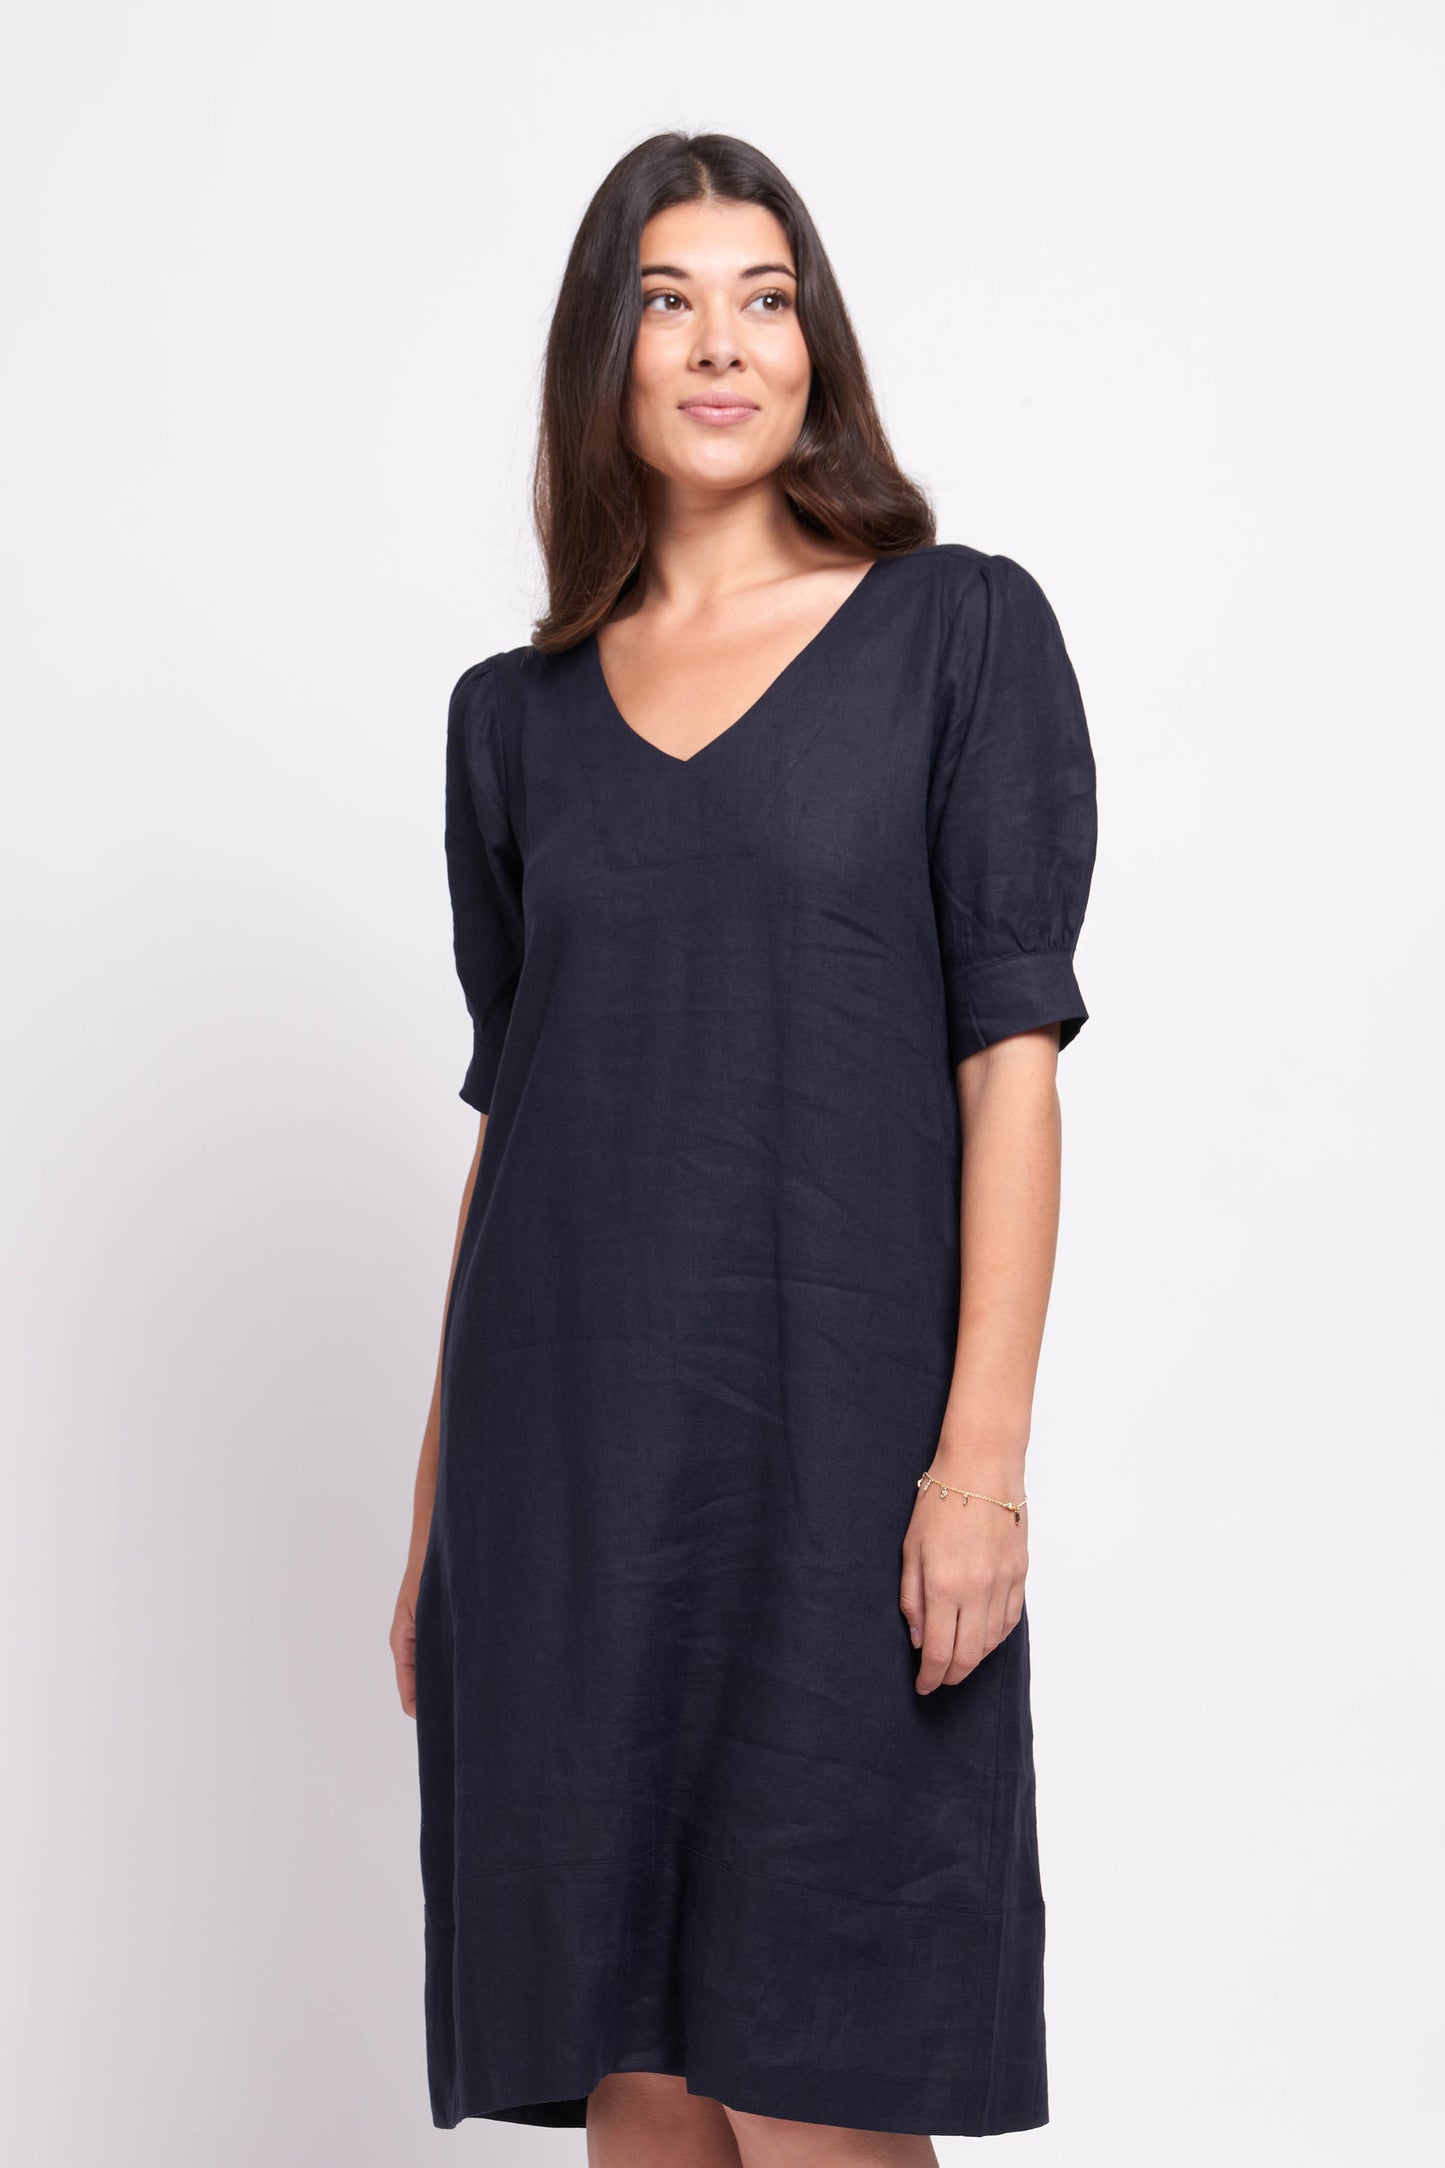 A woman standing in a studio, wearing a Foil navy v-neck linen dress and black sandals, with her hands gently clasped in front of her.